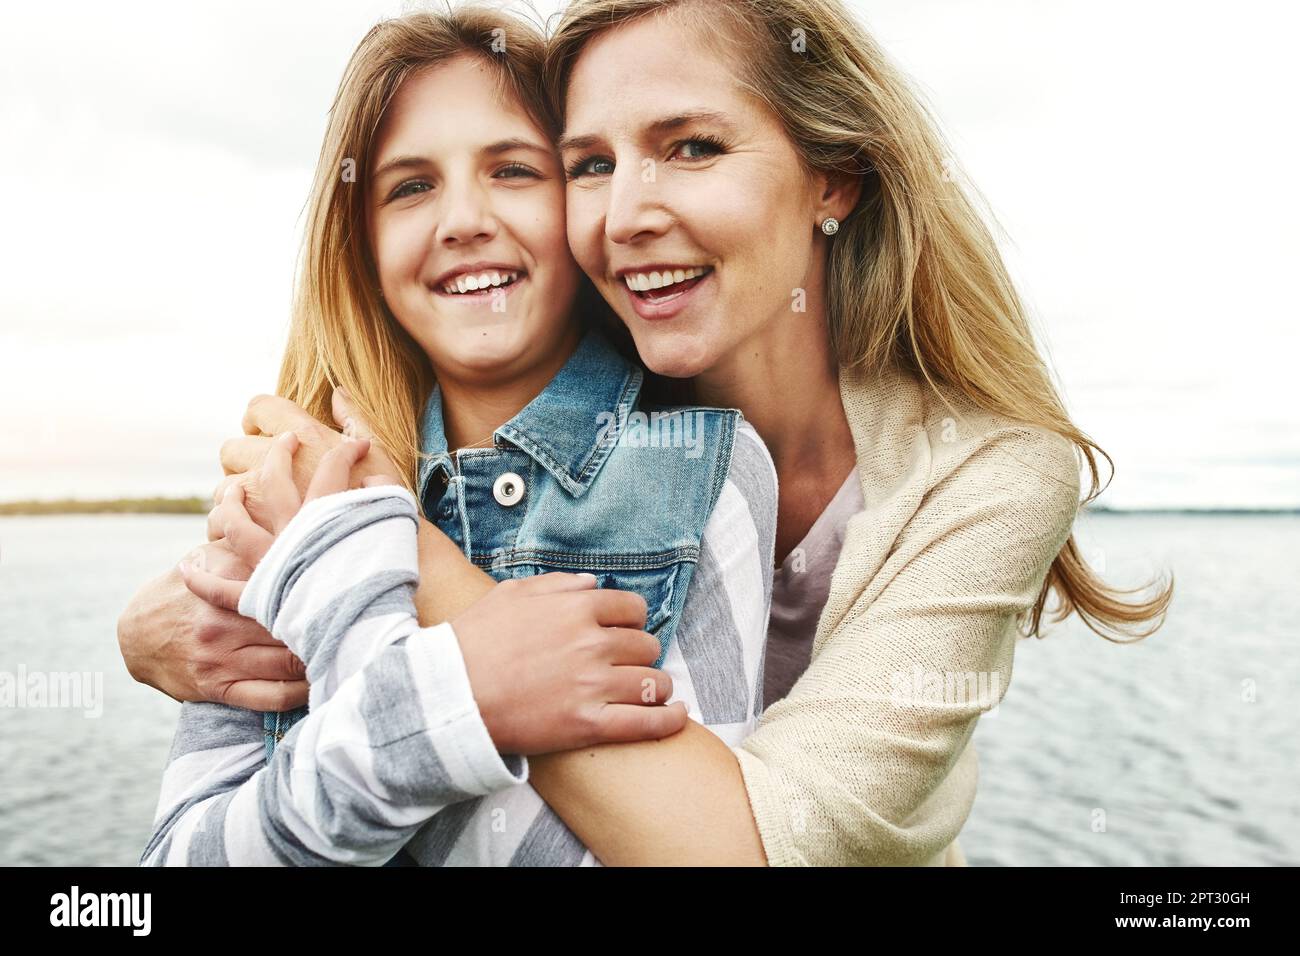 Filling each others lives with the biggest smiles. Portrait of a mother and her daughter bonding outdoors. Stock Photo